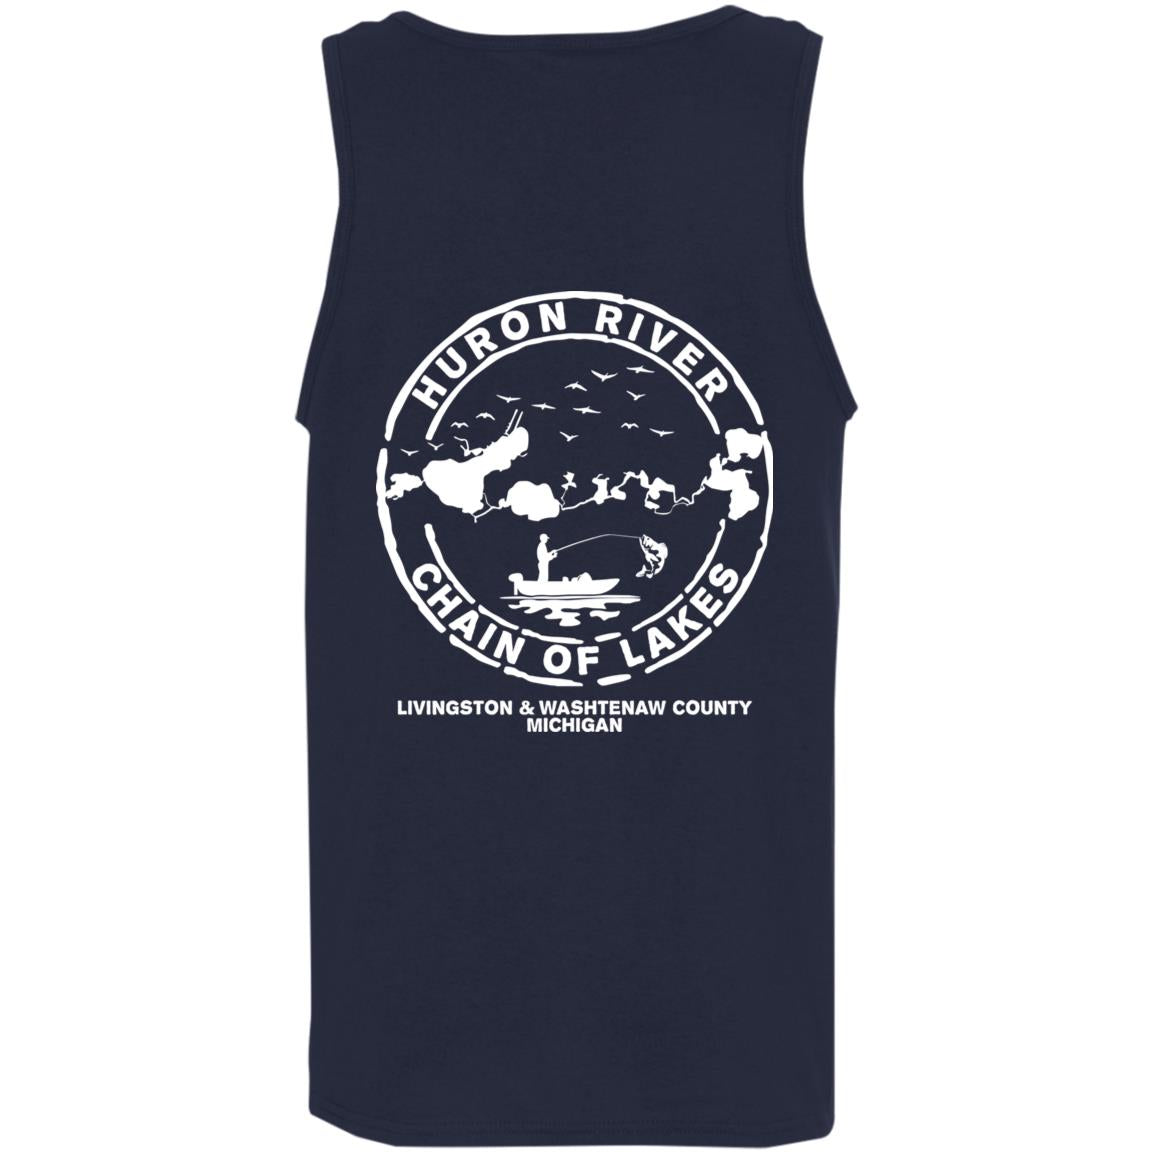 HRCL FL - Boat.... Bust Out Another Thousand - 2 Sided G520 Cotton Tank Top 5.3 oz.